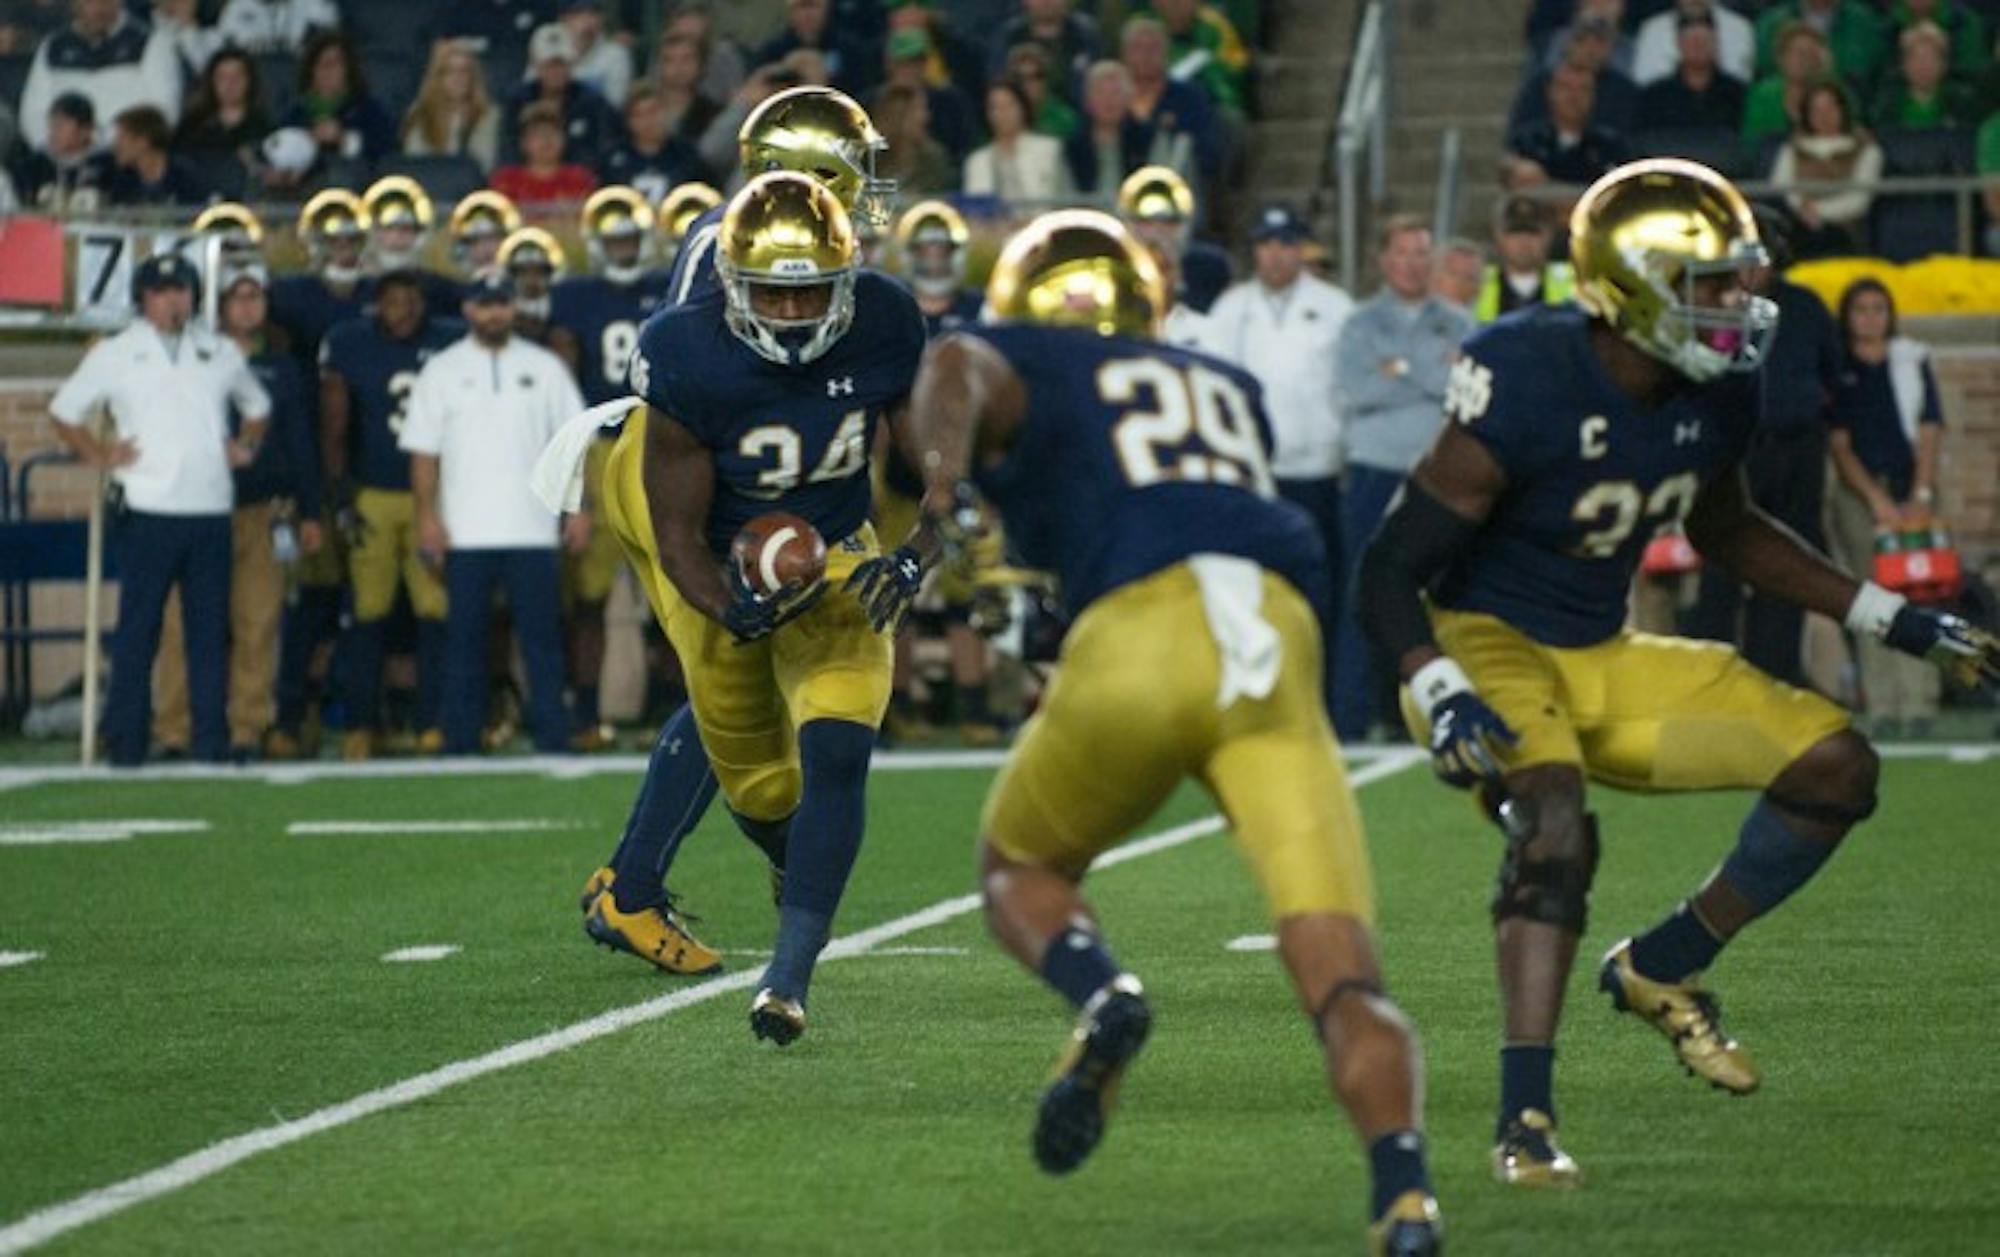 Irish sophomore running back Tony Jones Jr., left, takes a handoff and prepares to give it to sophomore wide receiver Kevin Stepherson, center, on the reverse during Notre Dame's 49-14 win over USC on Saturday at Notre Dame Stadium.